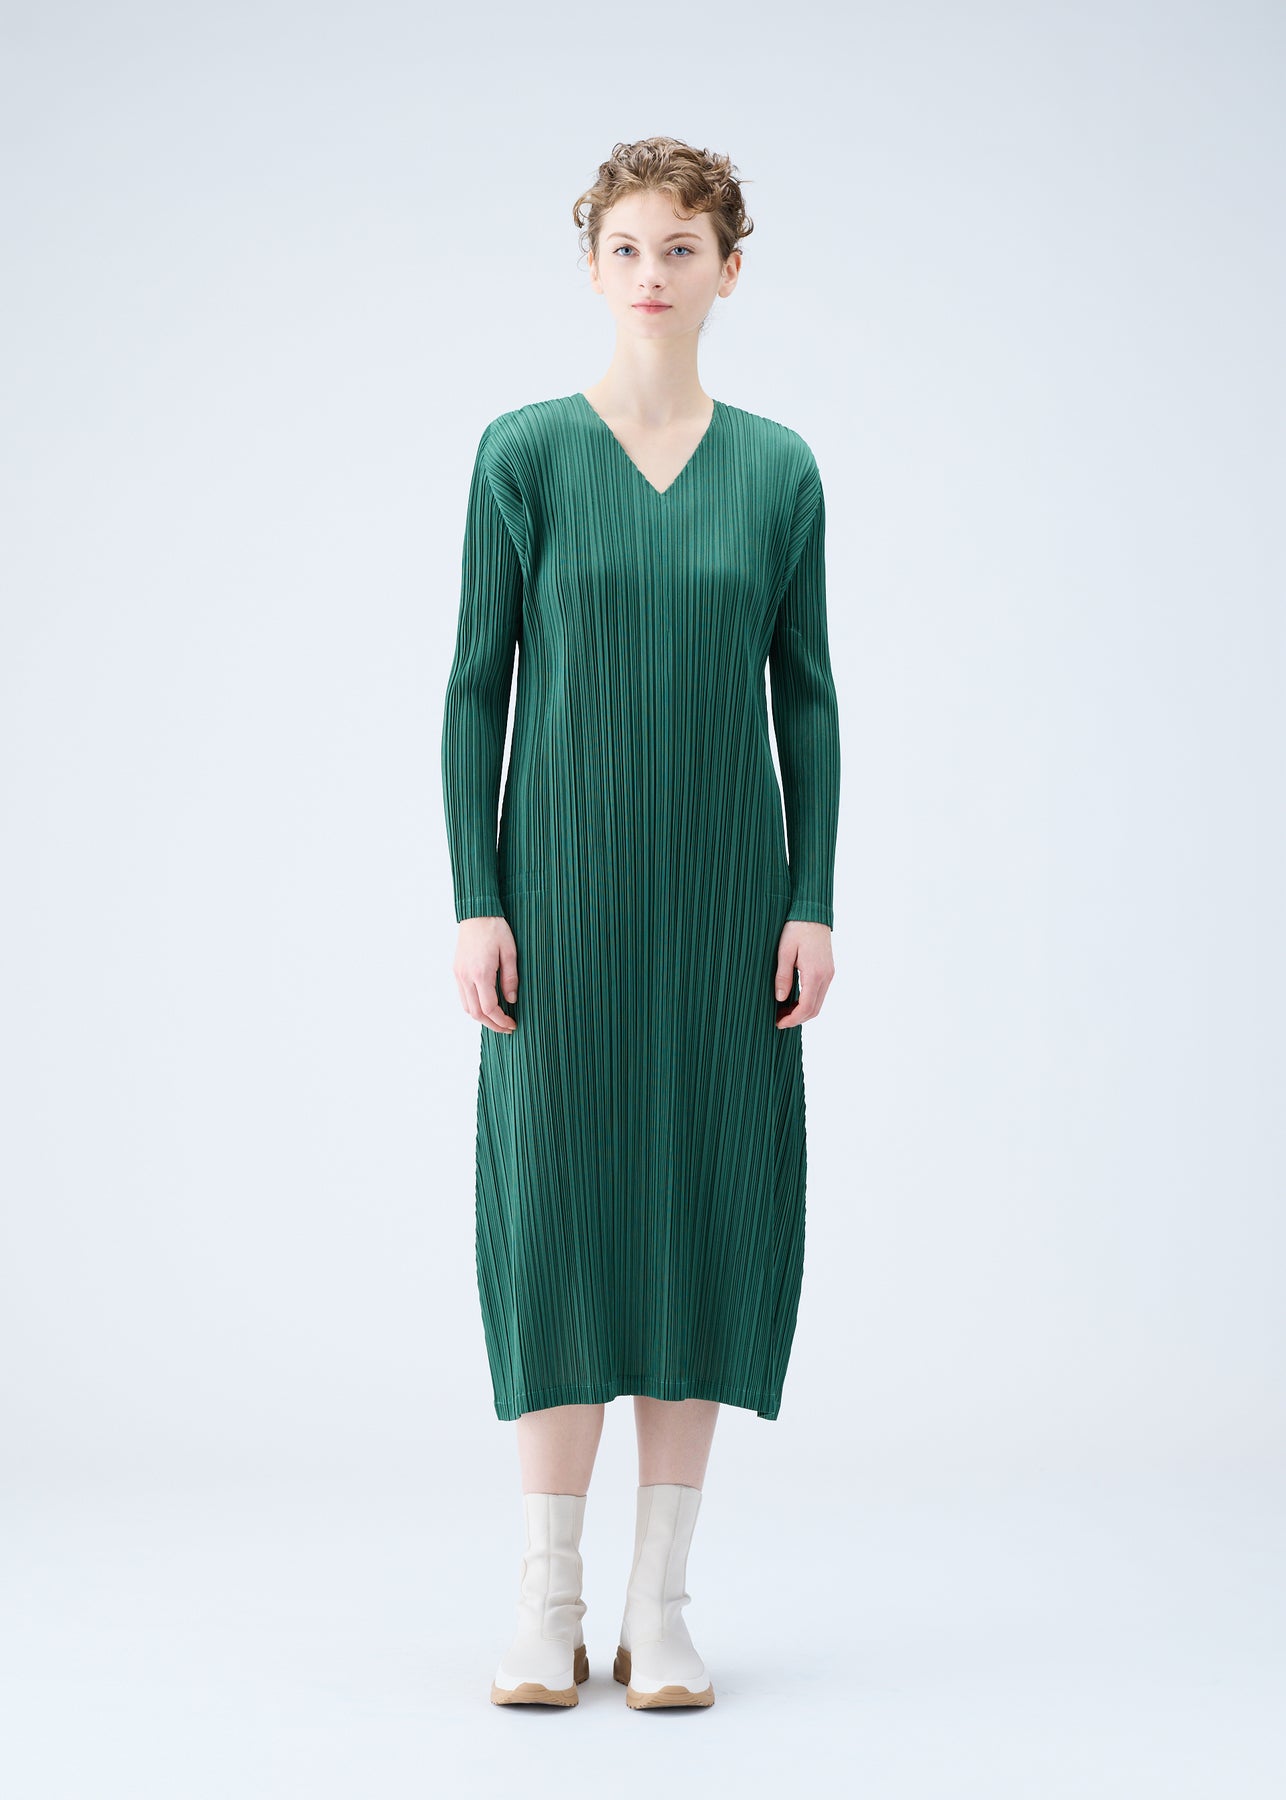 MONTHLY COLORS : DECEMBER DRESS | The official ISSEY MIYAKE ONLINE